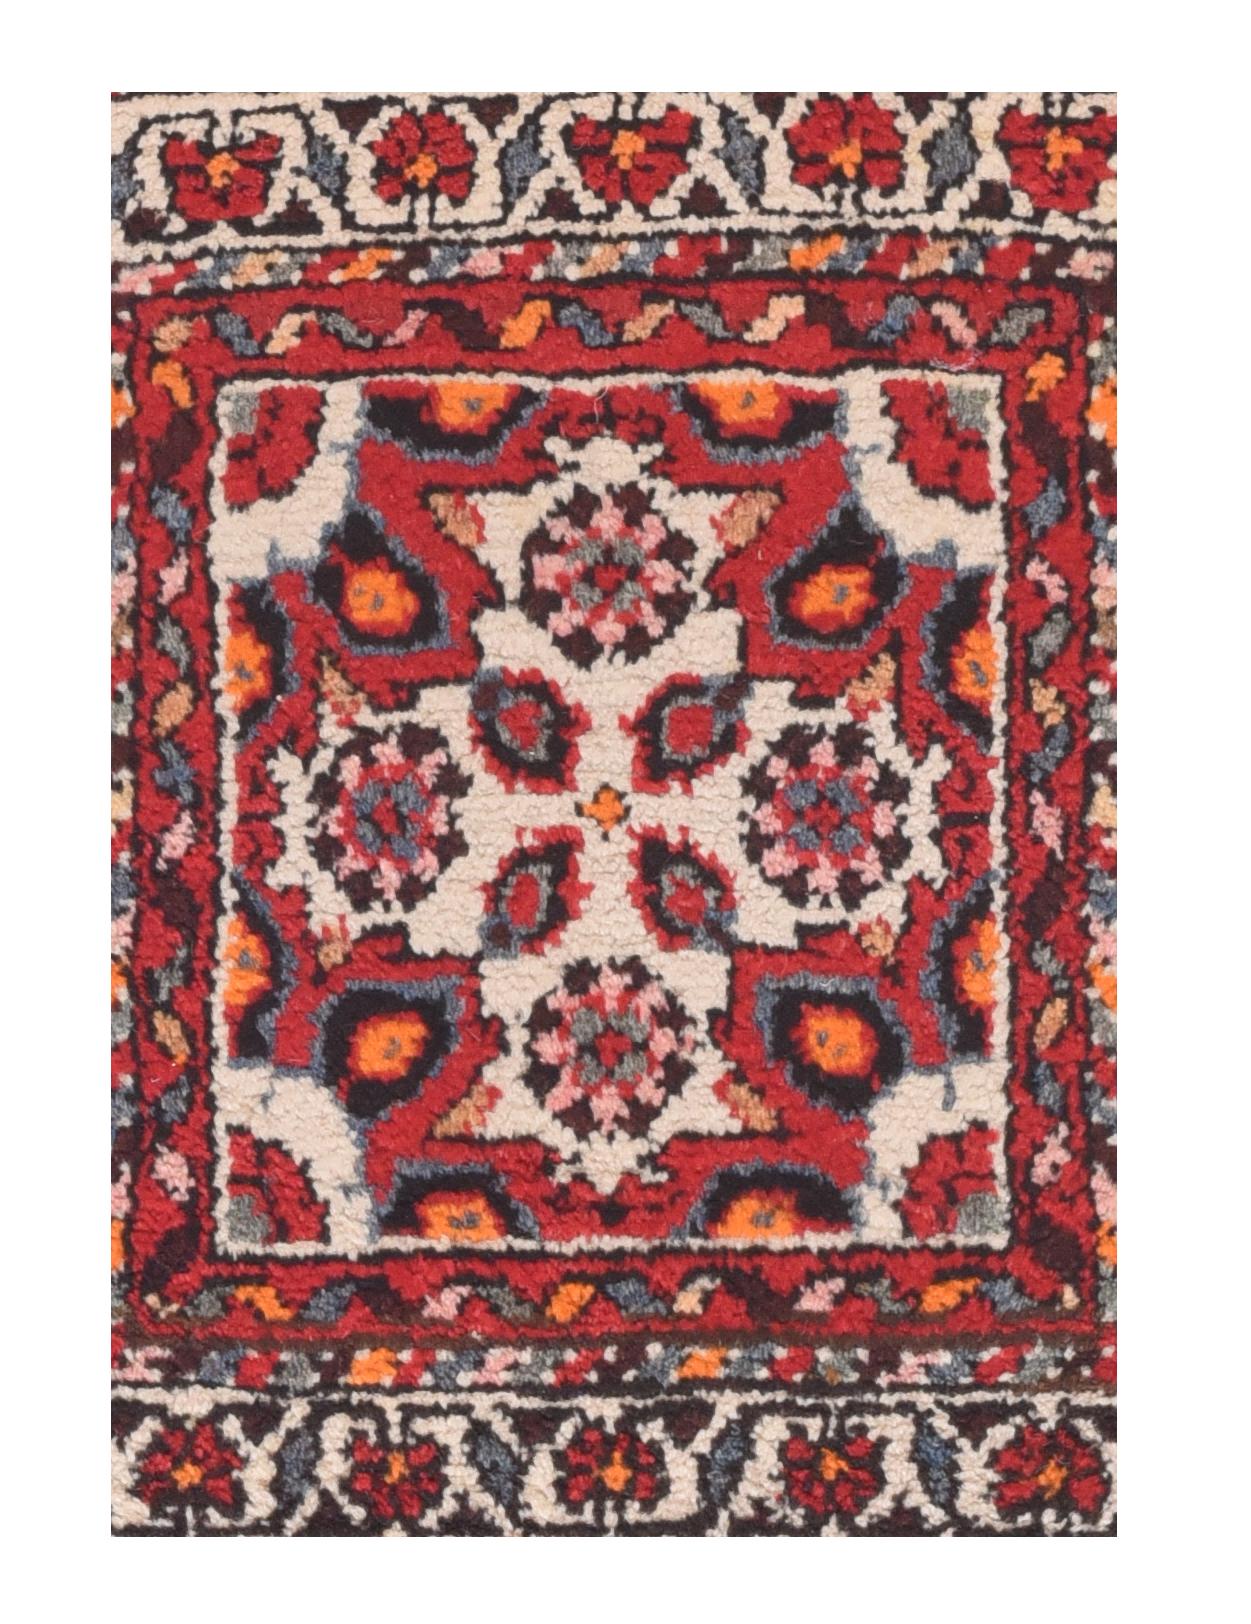 Antique Persian Hamedan Mat , hand knotted, circa 1920

Design: Floral

Hamadan is a city situated in the western part of Iran, 300 kilometres west of Teheran. It is one of the worlds oldest cities and is mentioned under the name of Ekbatana in the